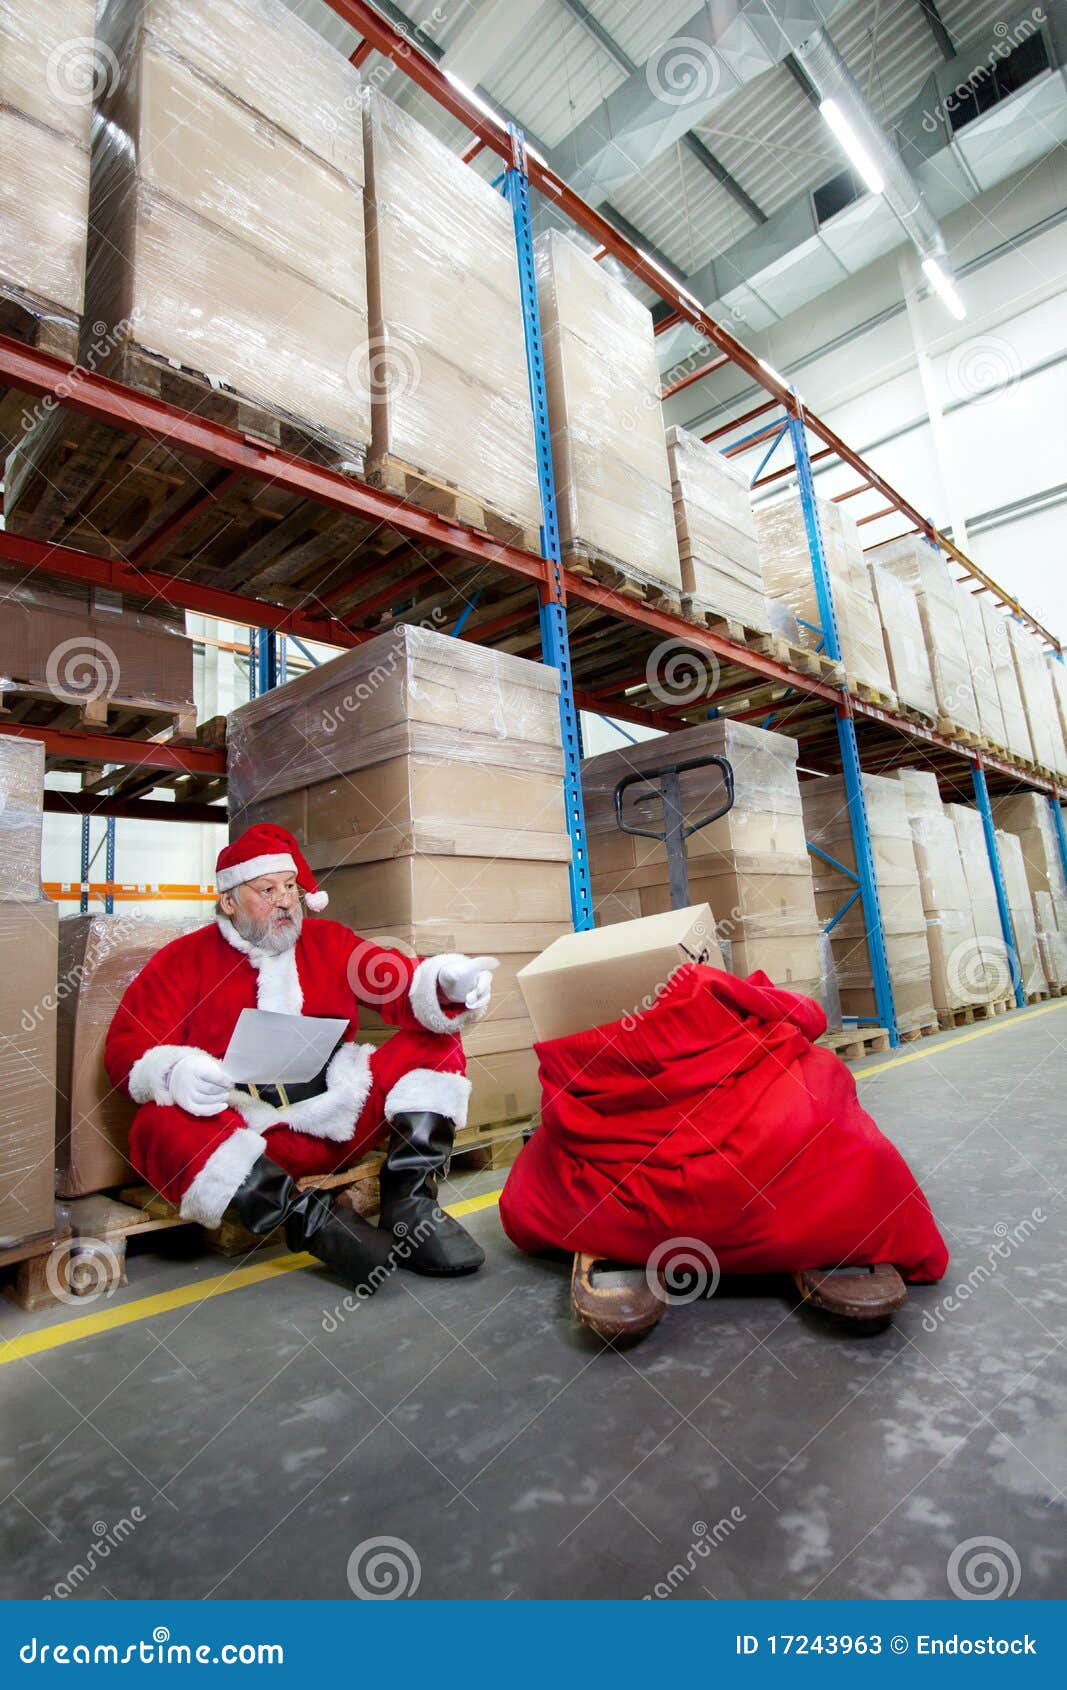 santa claus checking list of gifts in storehouse